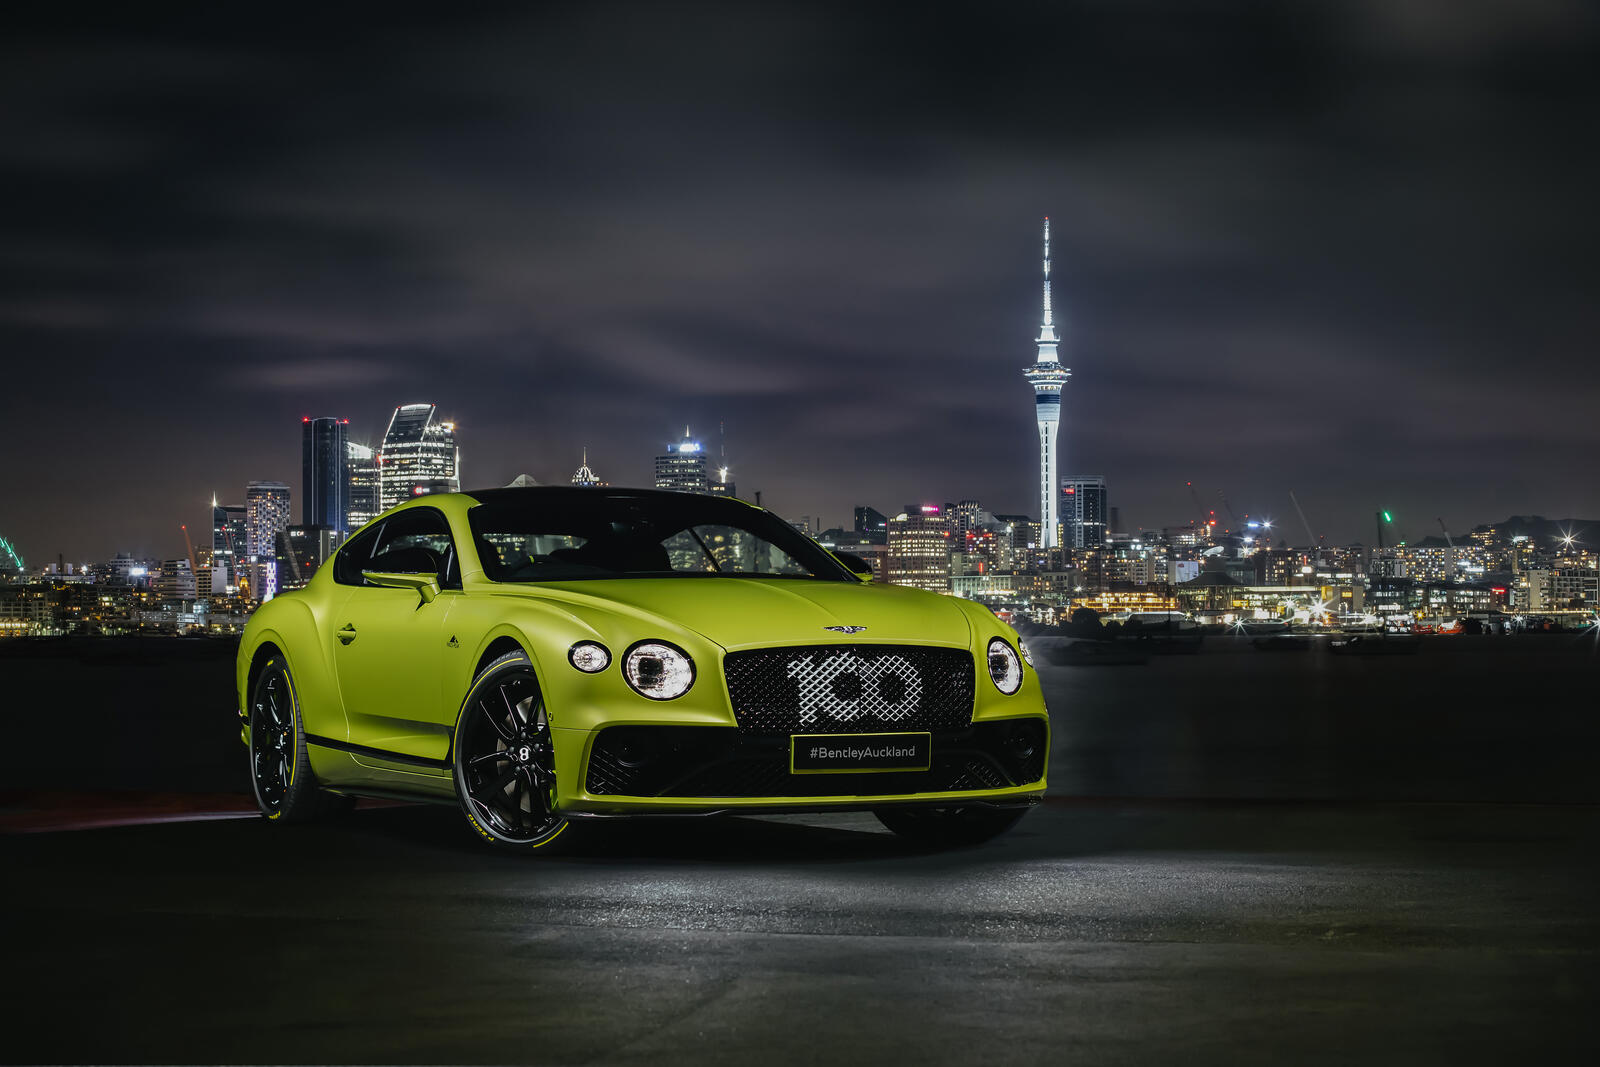 Free photo The 2021 Bentley Continental GT is an unusual green color